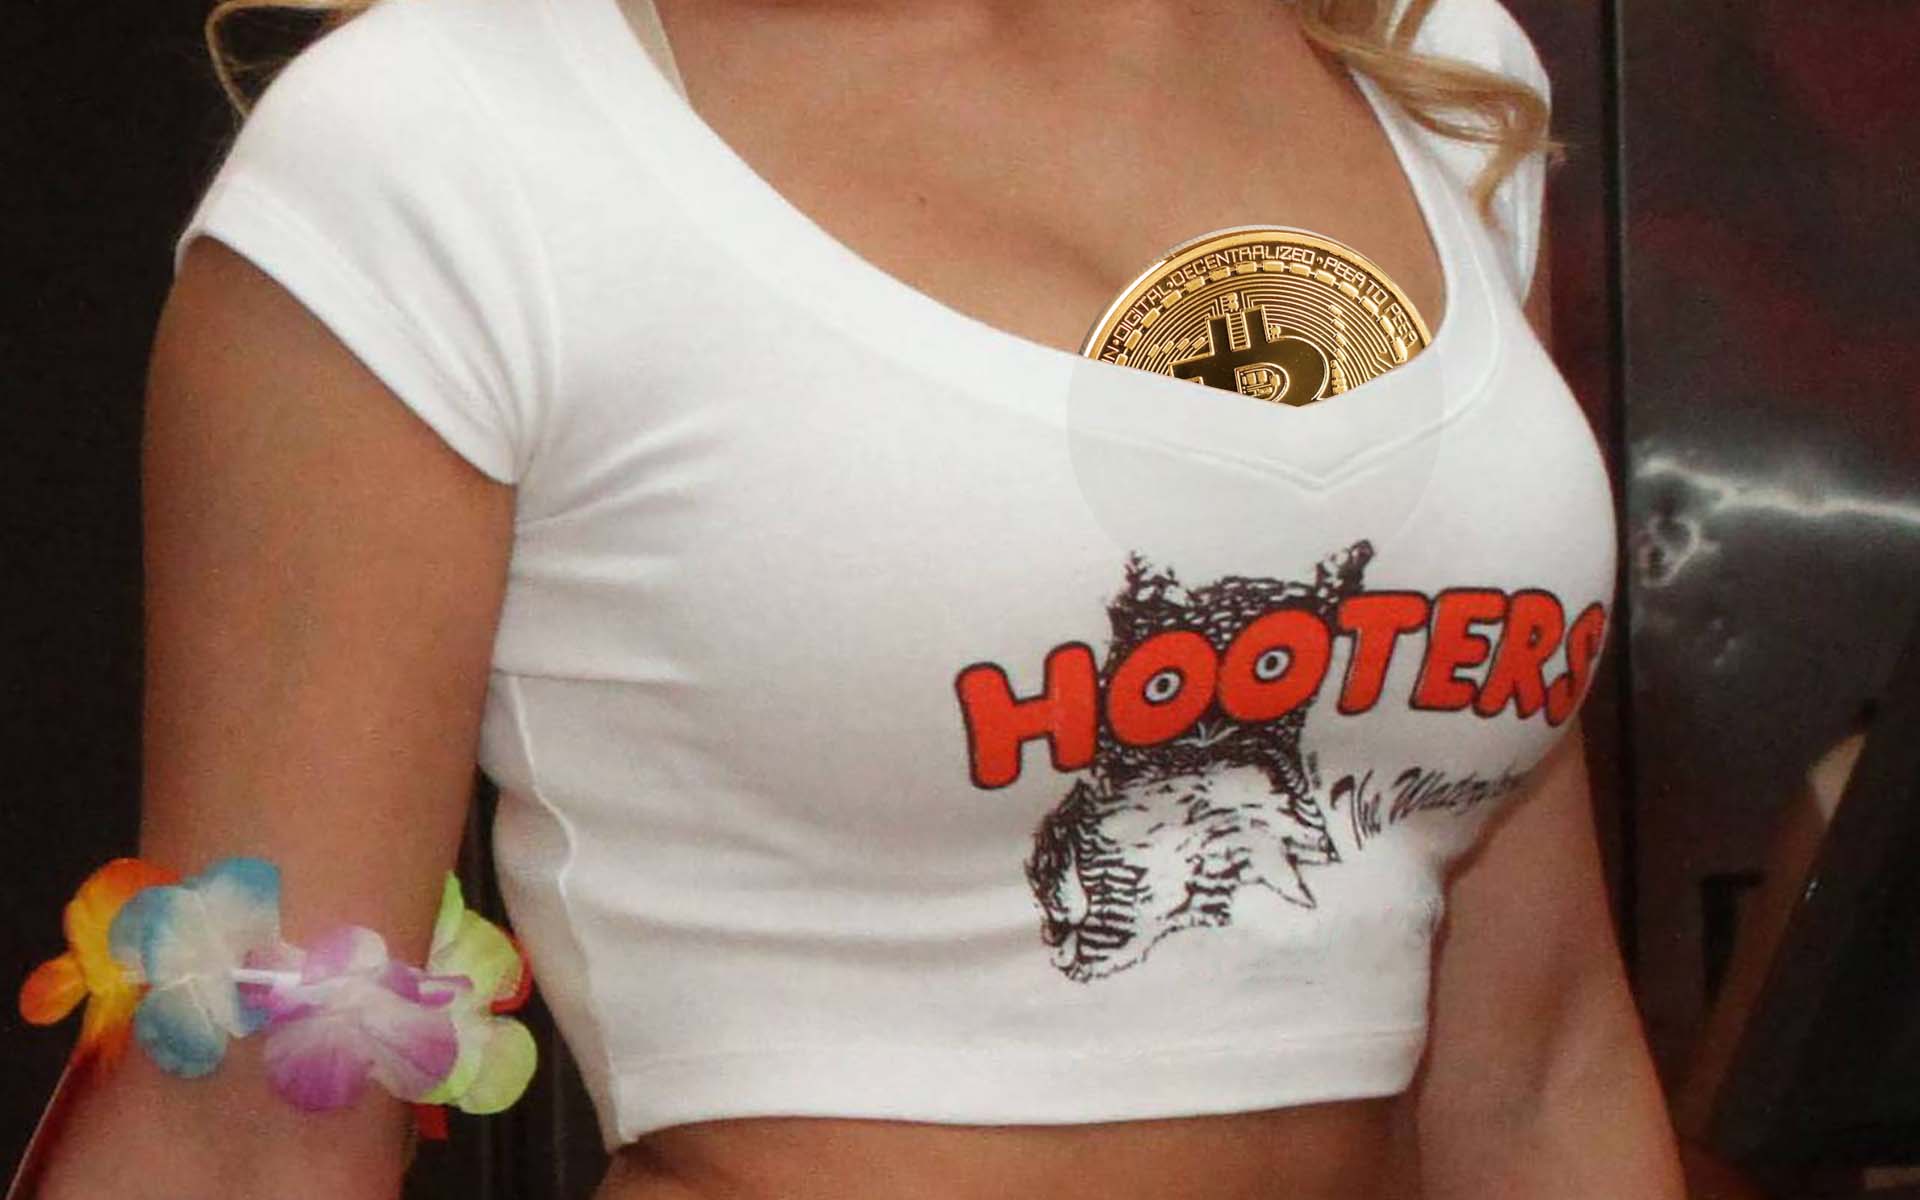 Hooters Boosted by Backing Bitcoin and Blockchain